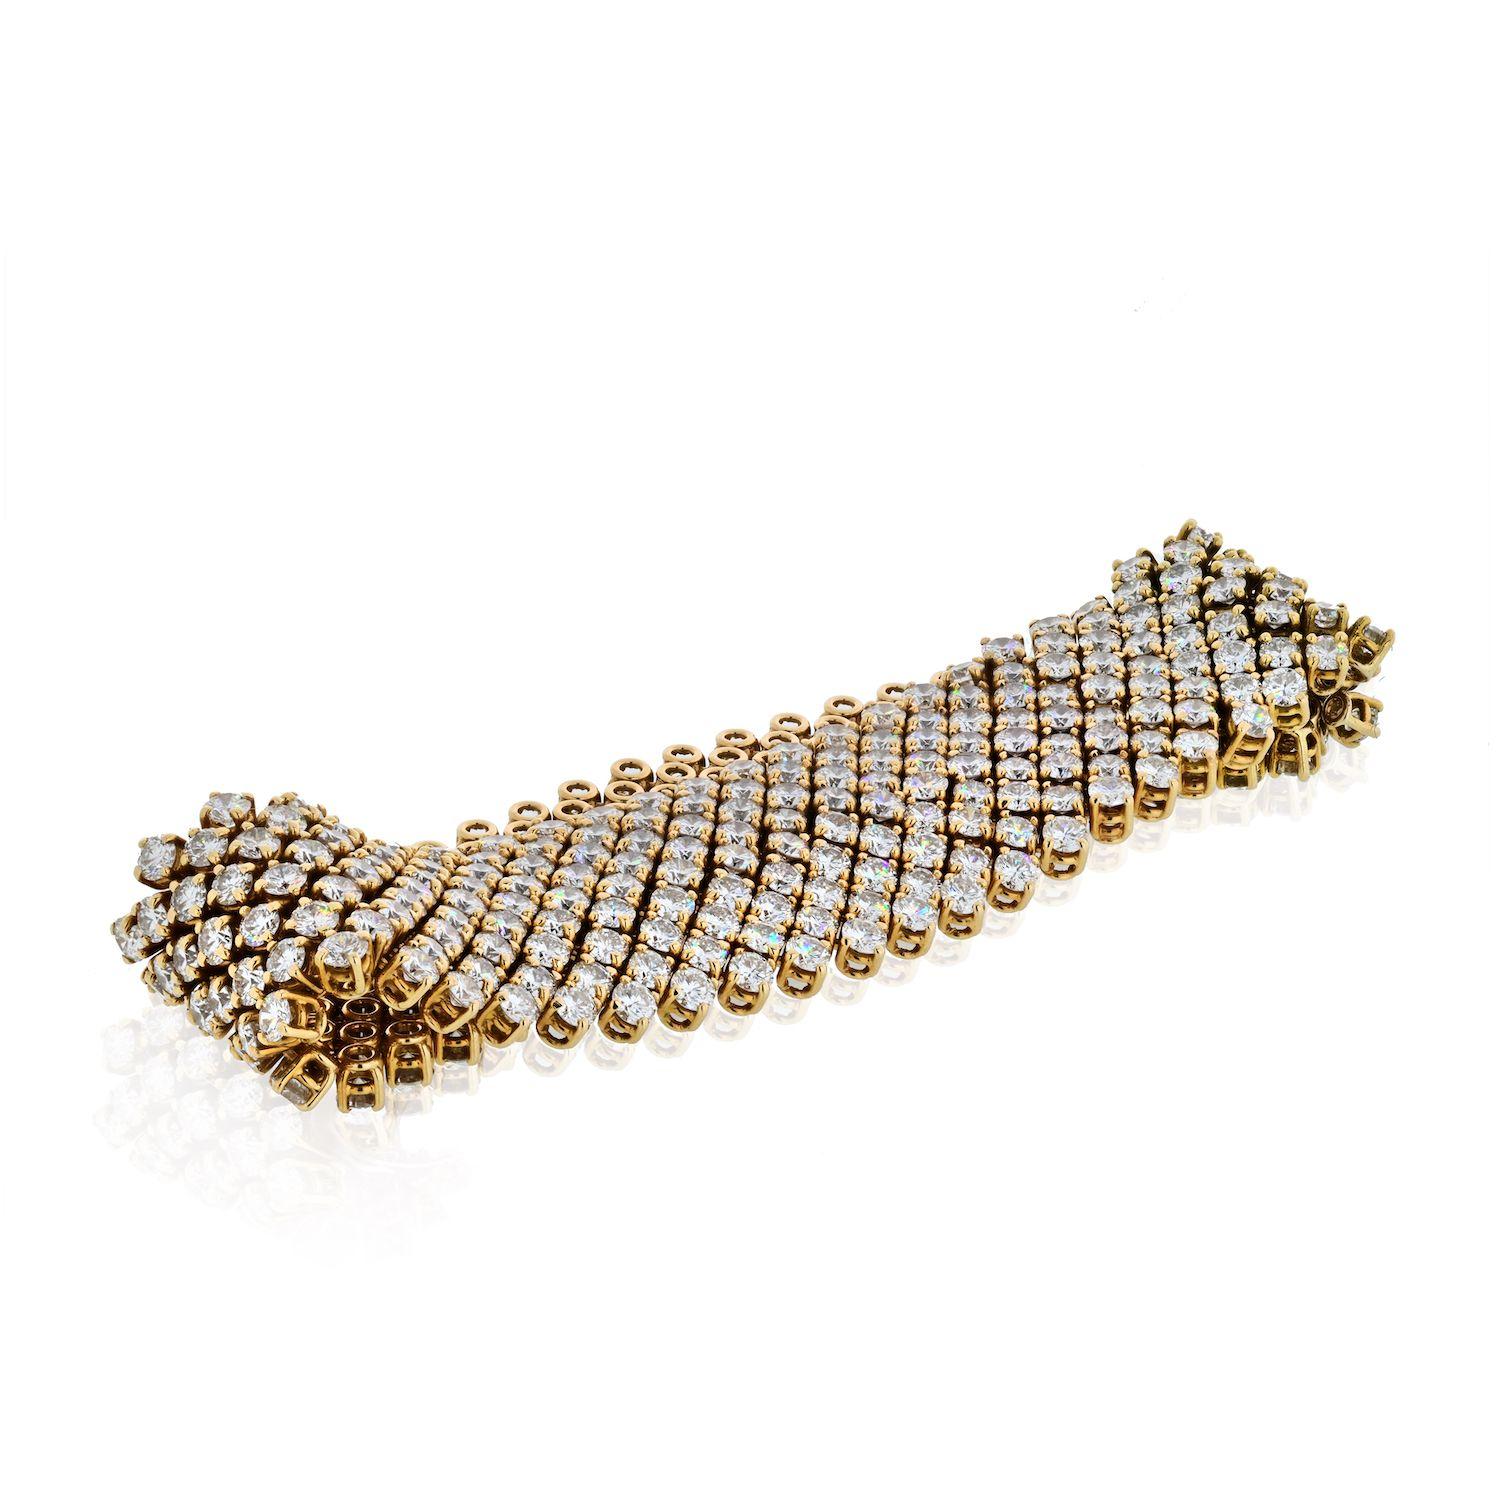 18K Yellow Gold Diamond Flexible Bracelet
Diamonds: 27cts (approx.)
Quality: F-G color, VS clarity
Material: 18K Gold
Length: 7 inches
Asprey International Limited, formerly Asprey & Garrard Limited, is a United Kingdom-based designer, manufacturer